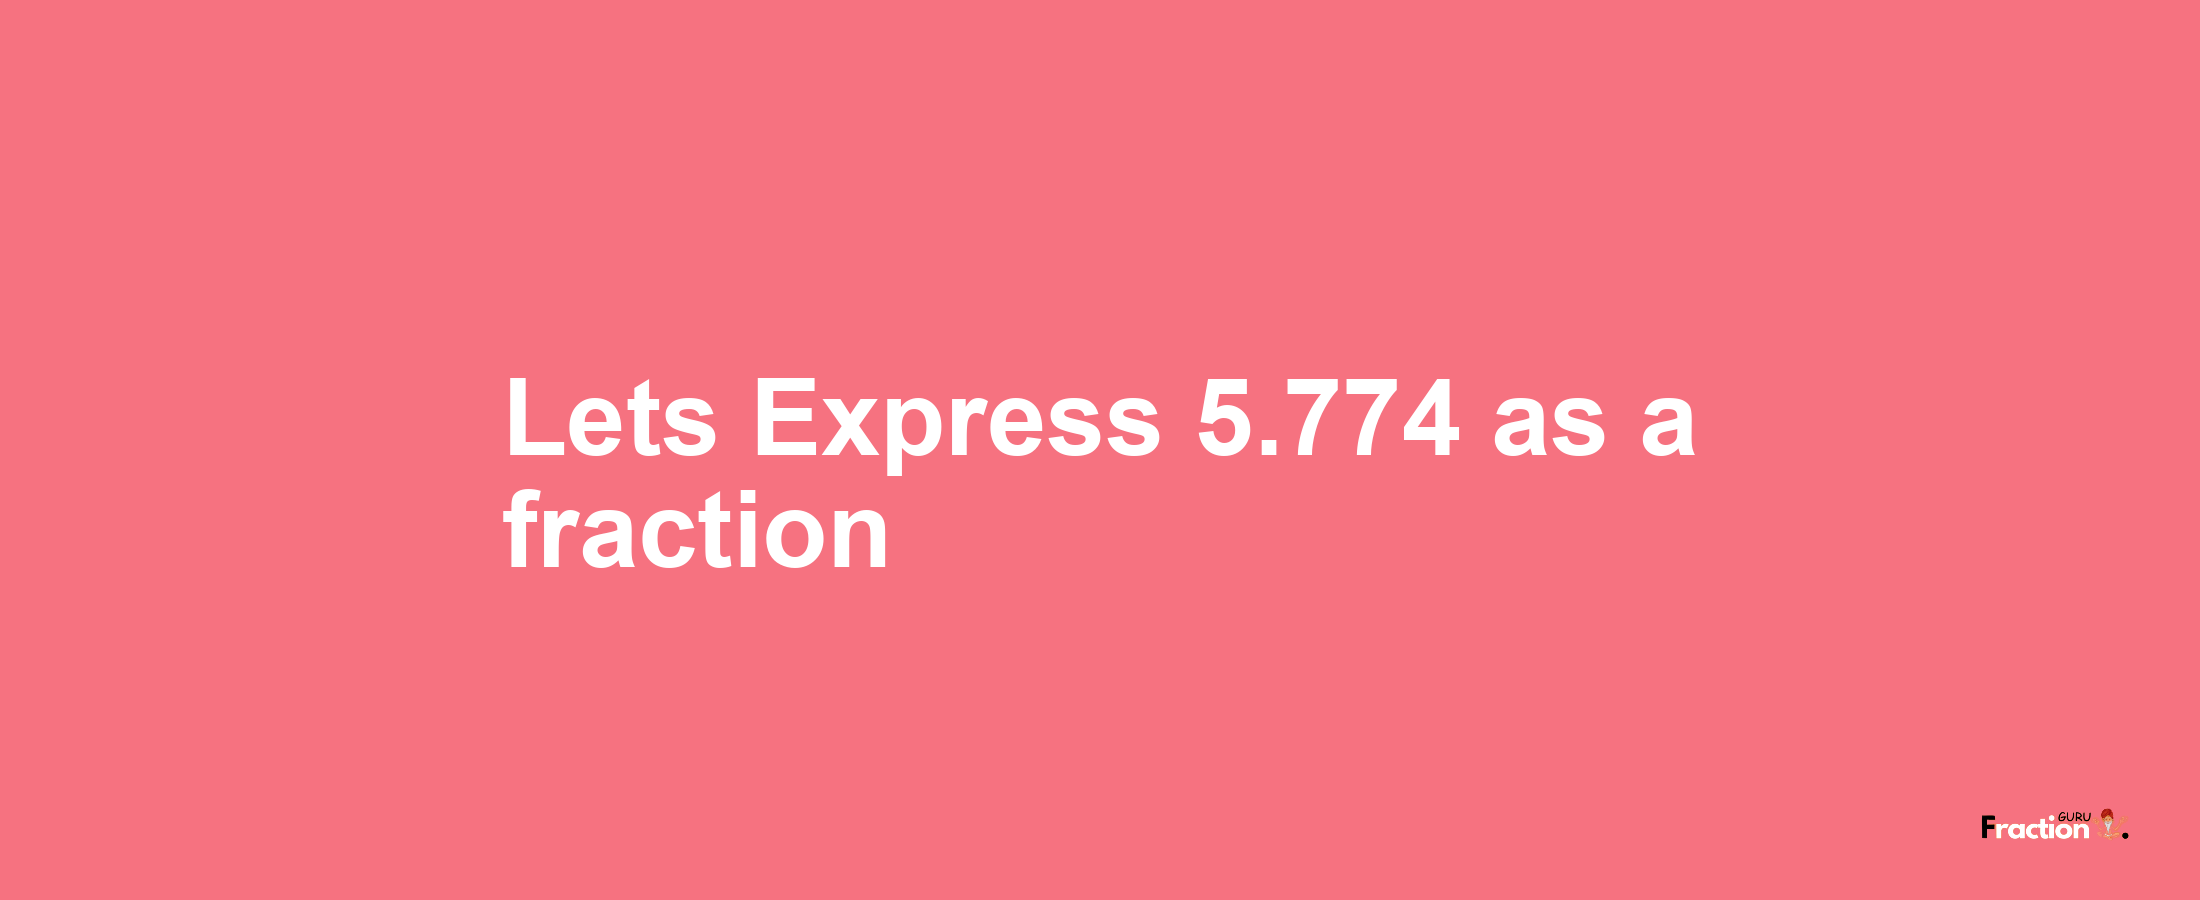 Lets Express 5.774 as afraction